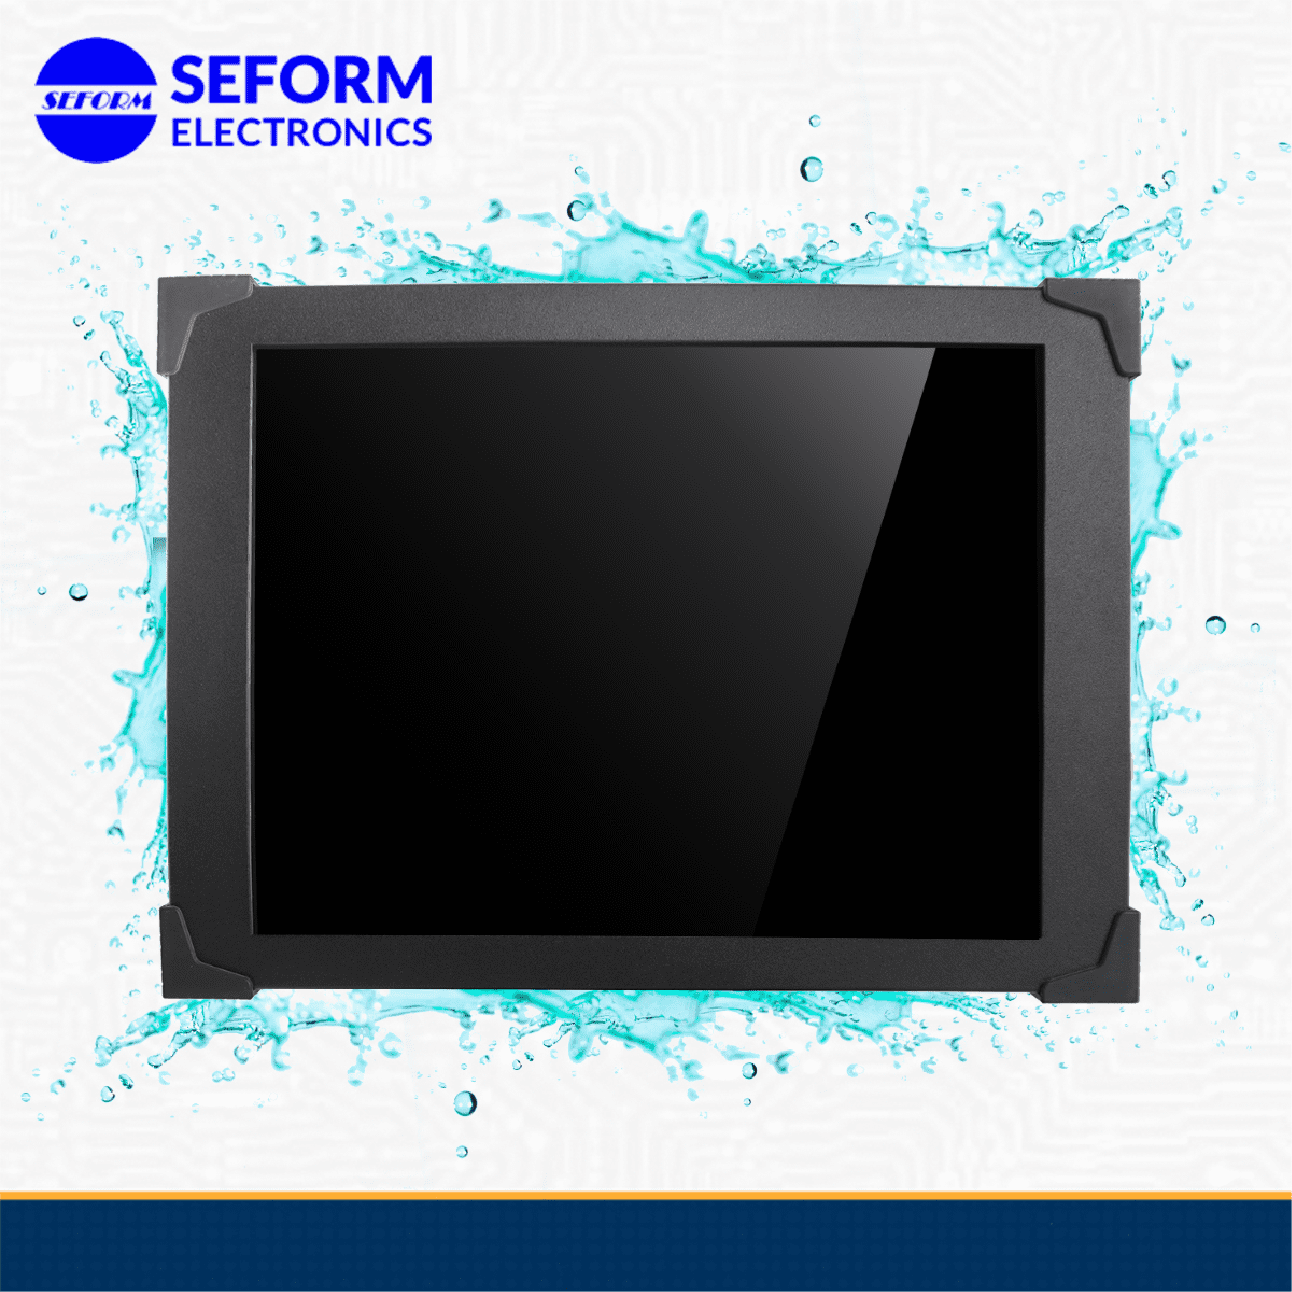 SEF121TPC-LXH-PCT-FI is an industrial waterproof touch monitor which can be used to any kinds of vehicles.